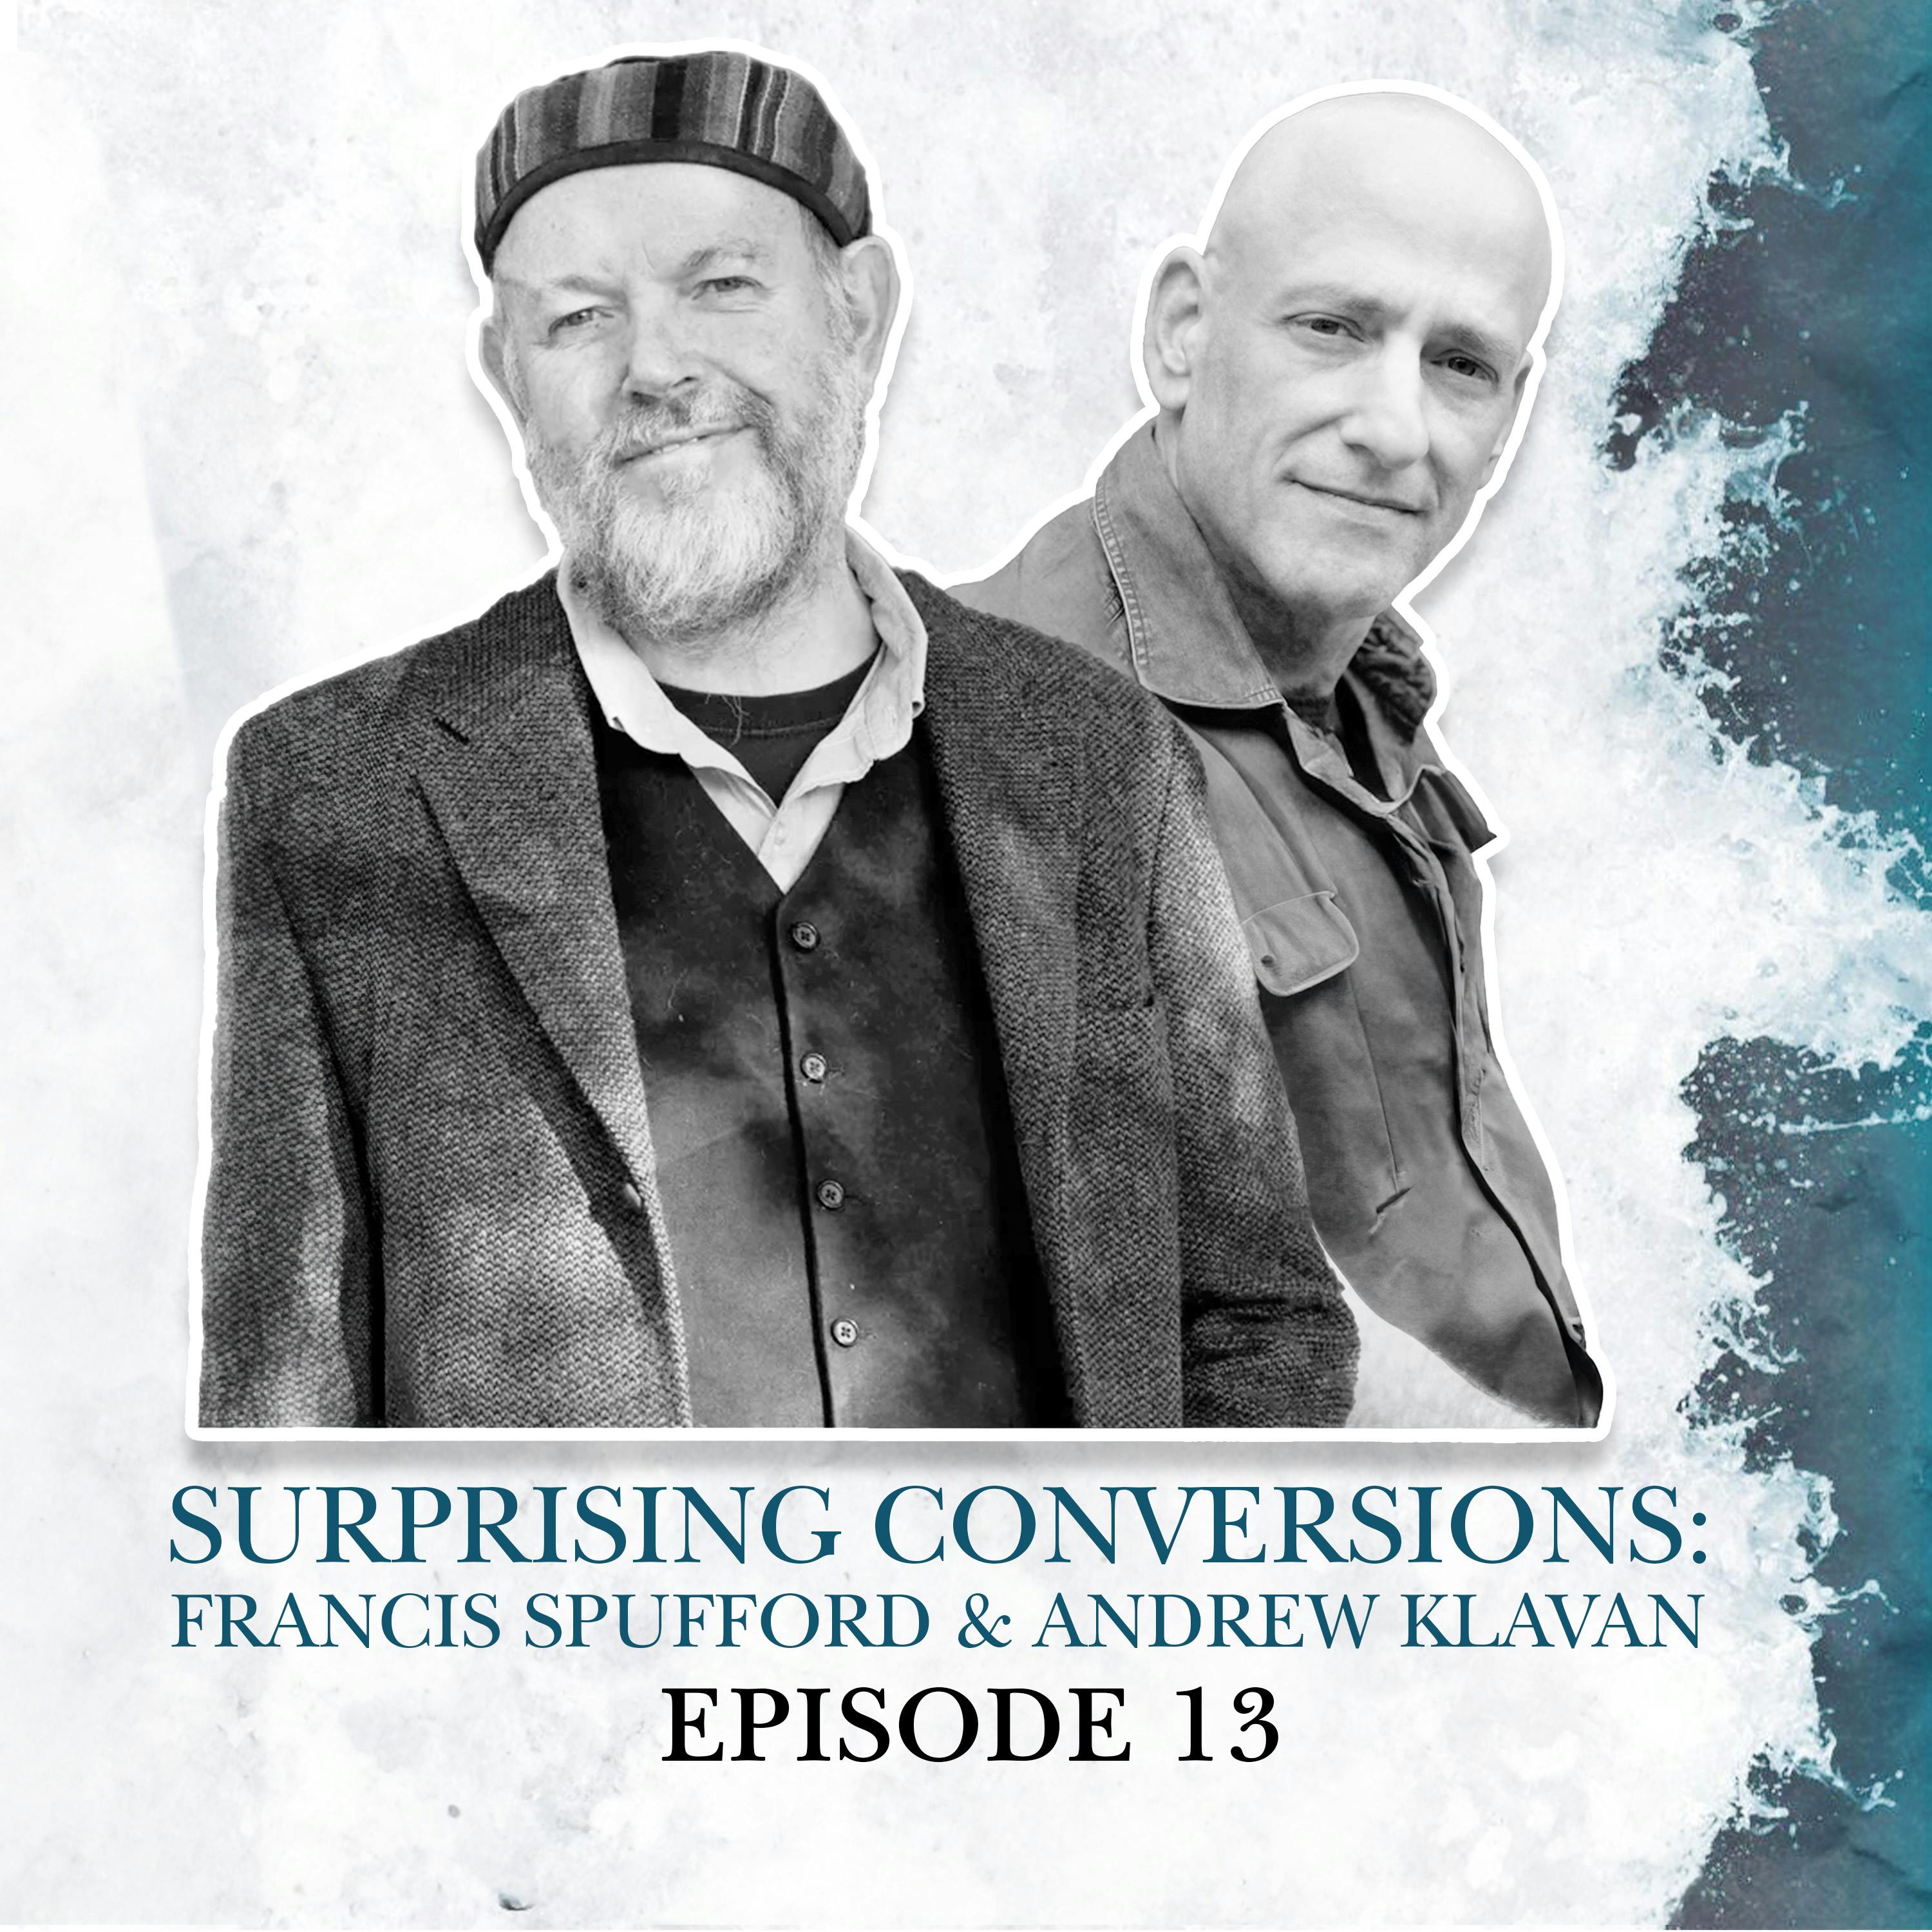 13. Francis Spufford & Andrew Klavan: A celebrated author and Hollywood screenwriter come to faith